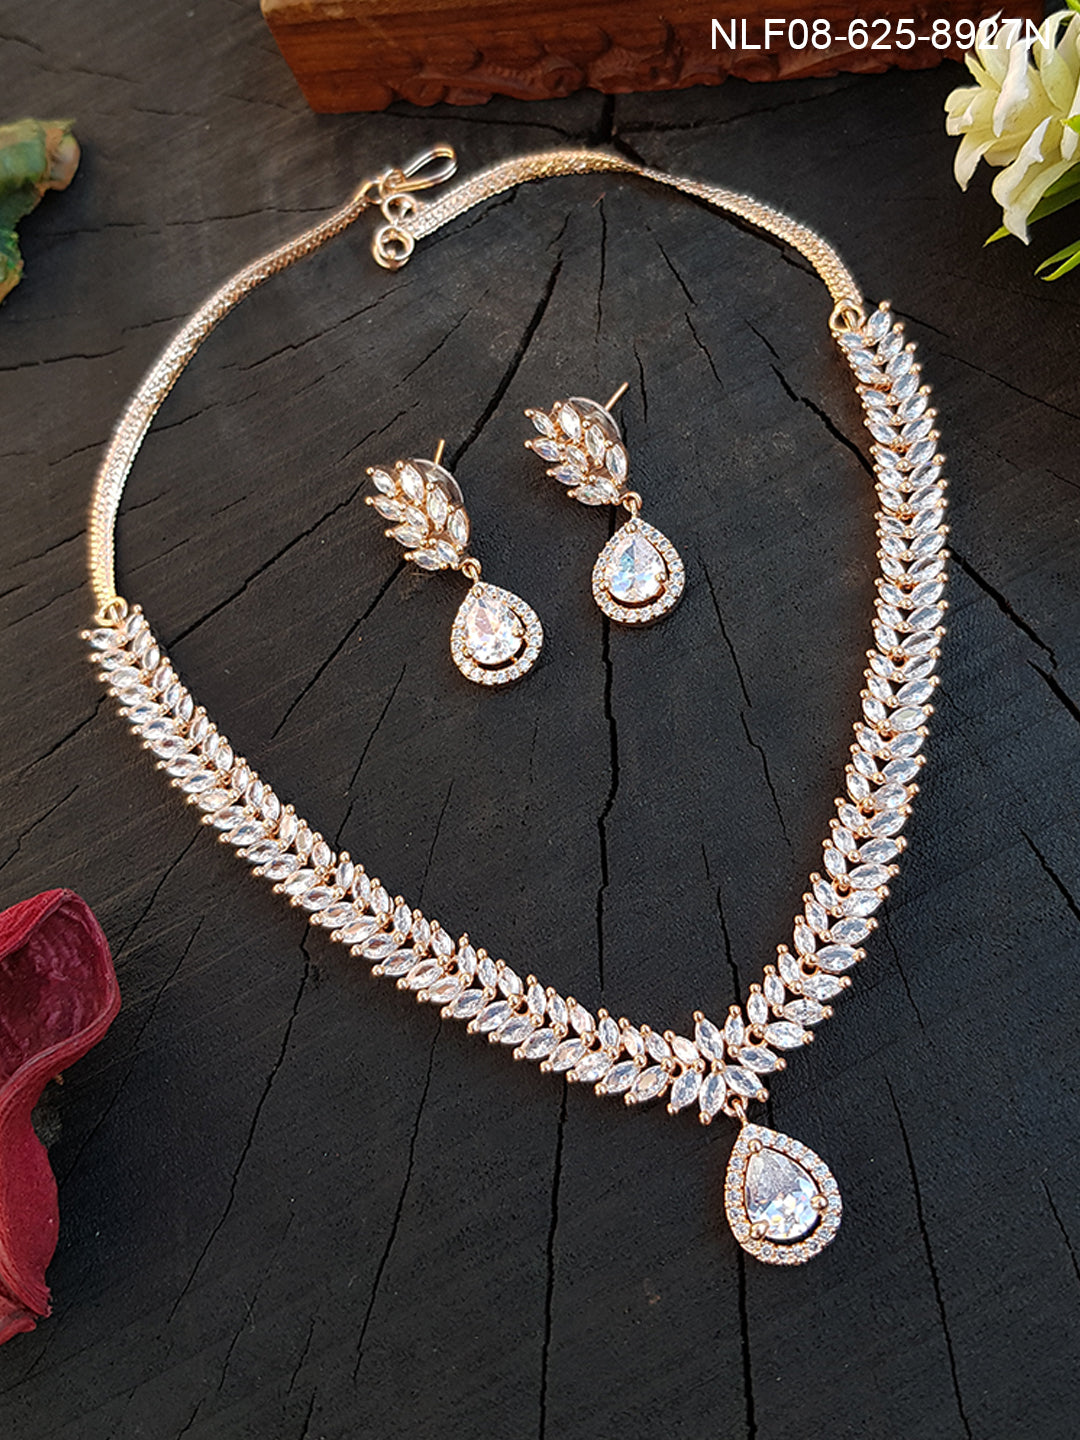 Premium Rose Gold Plated with sparkling white CZ stones Necklace Set 8927N